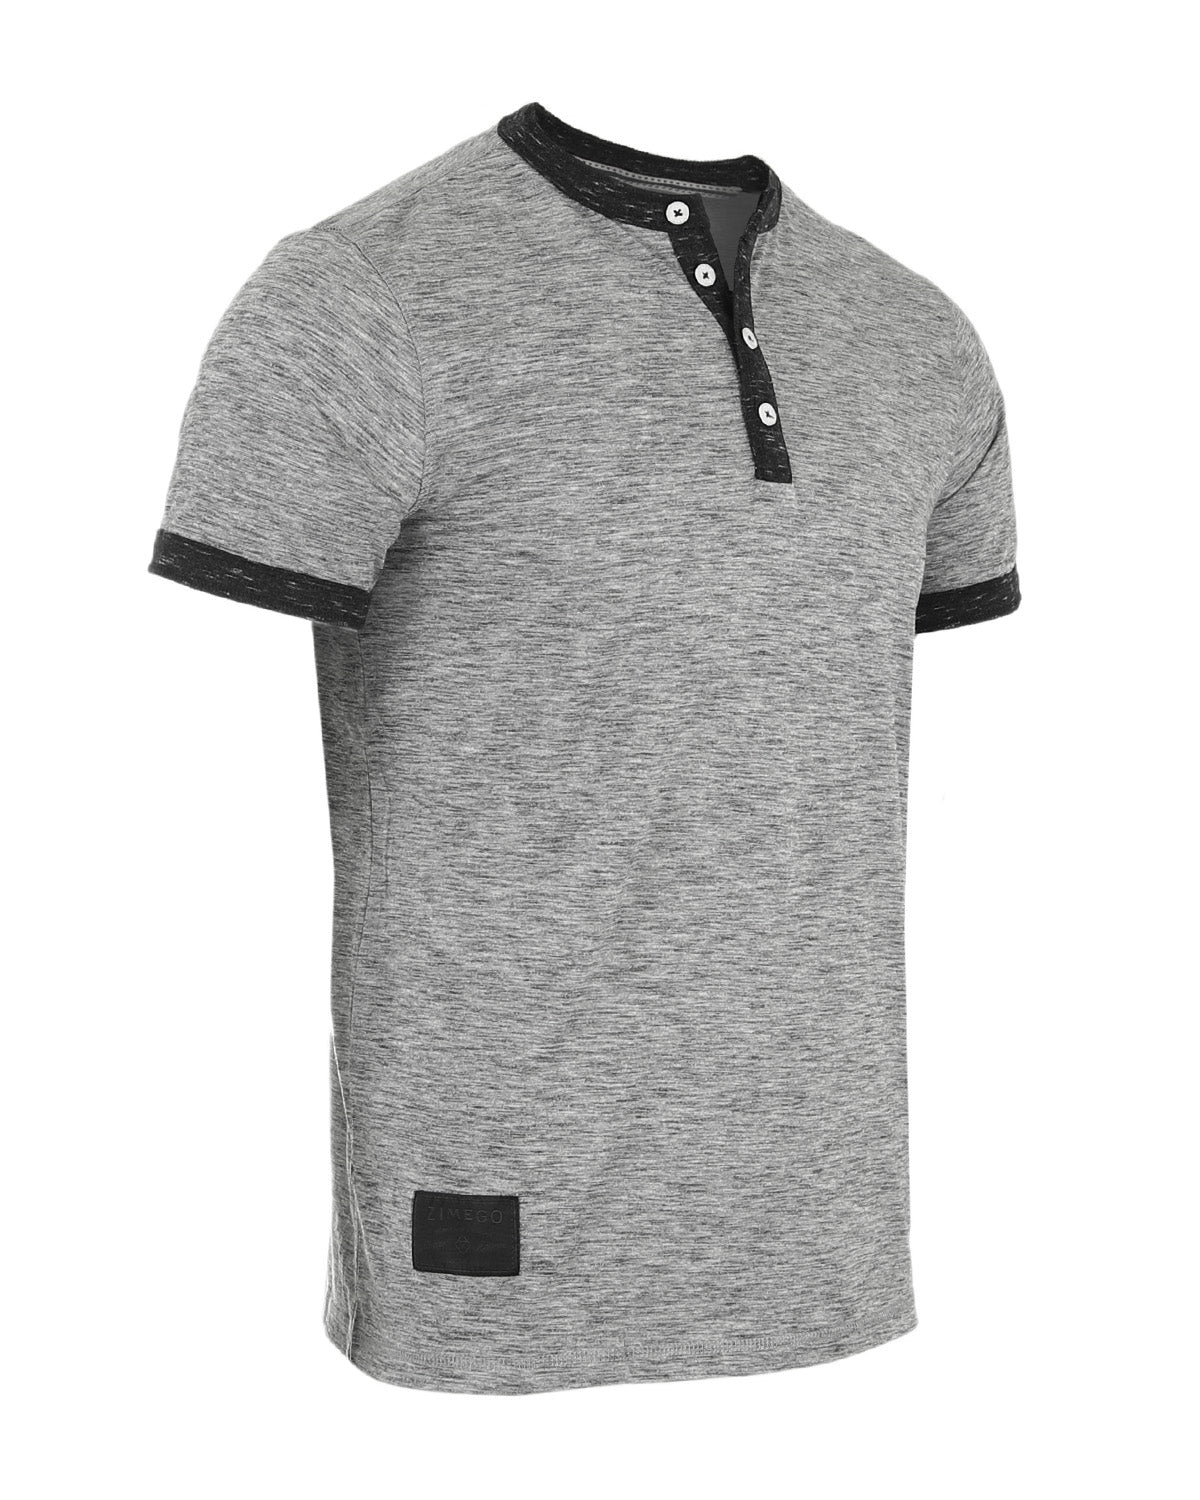 Men's Short Sleeve Contrast Ringer Button Henley Casual Outfit Shirts